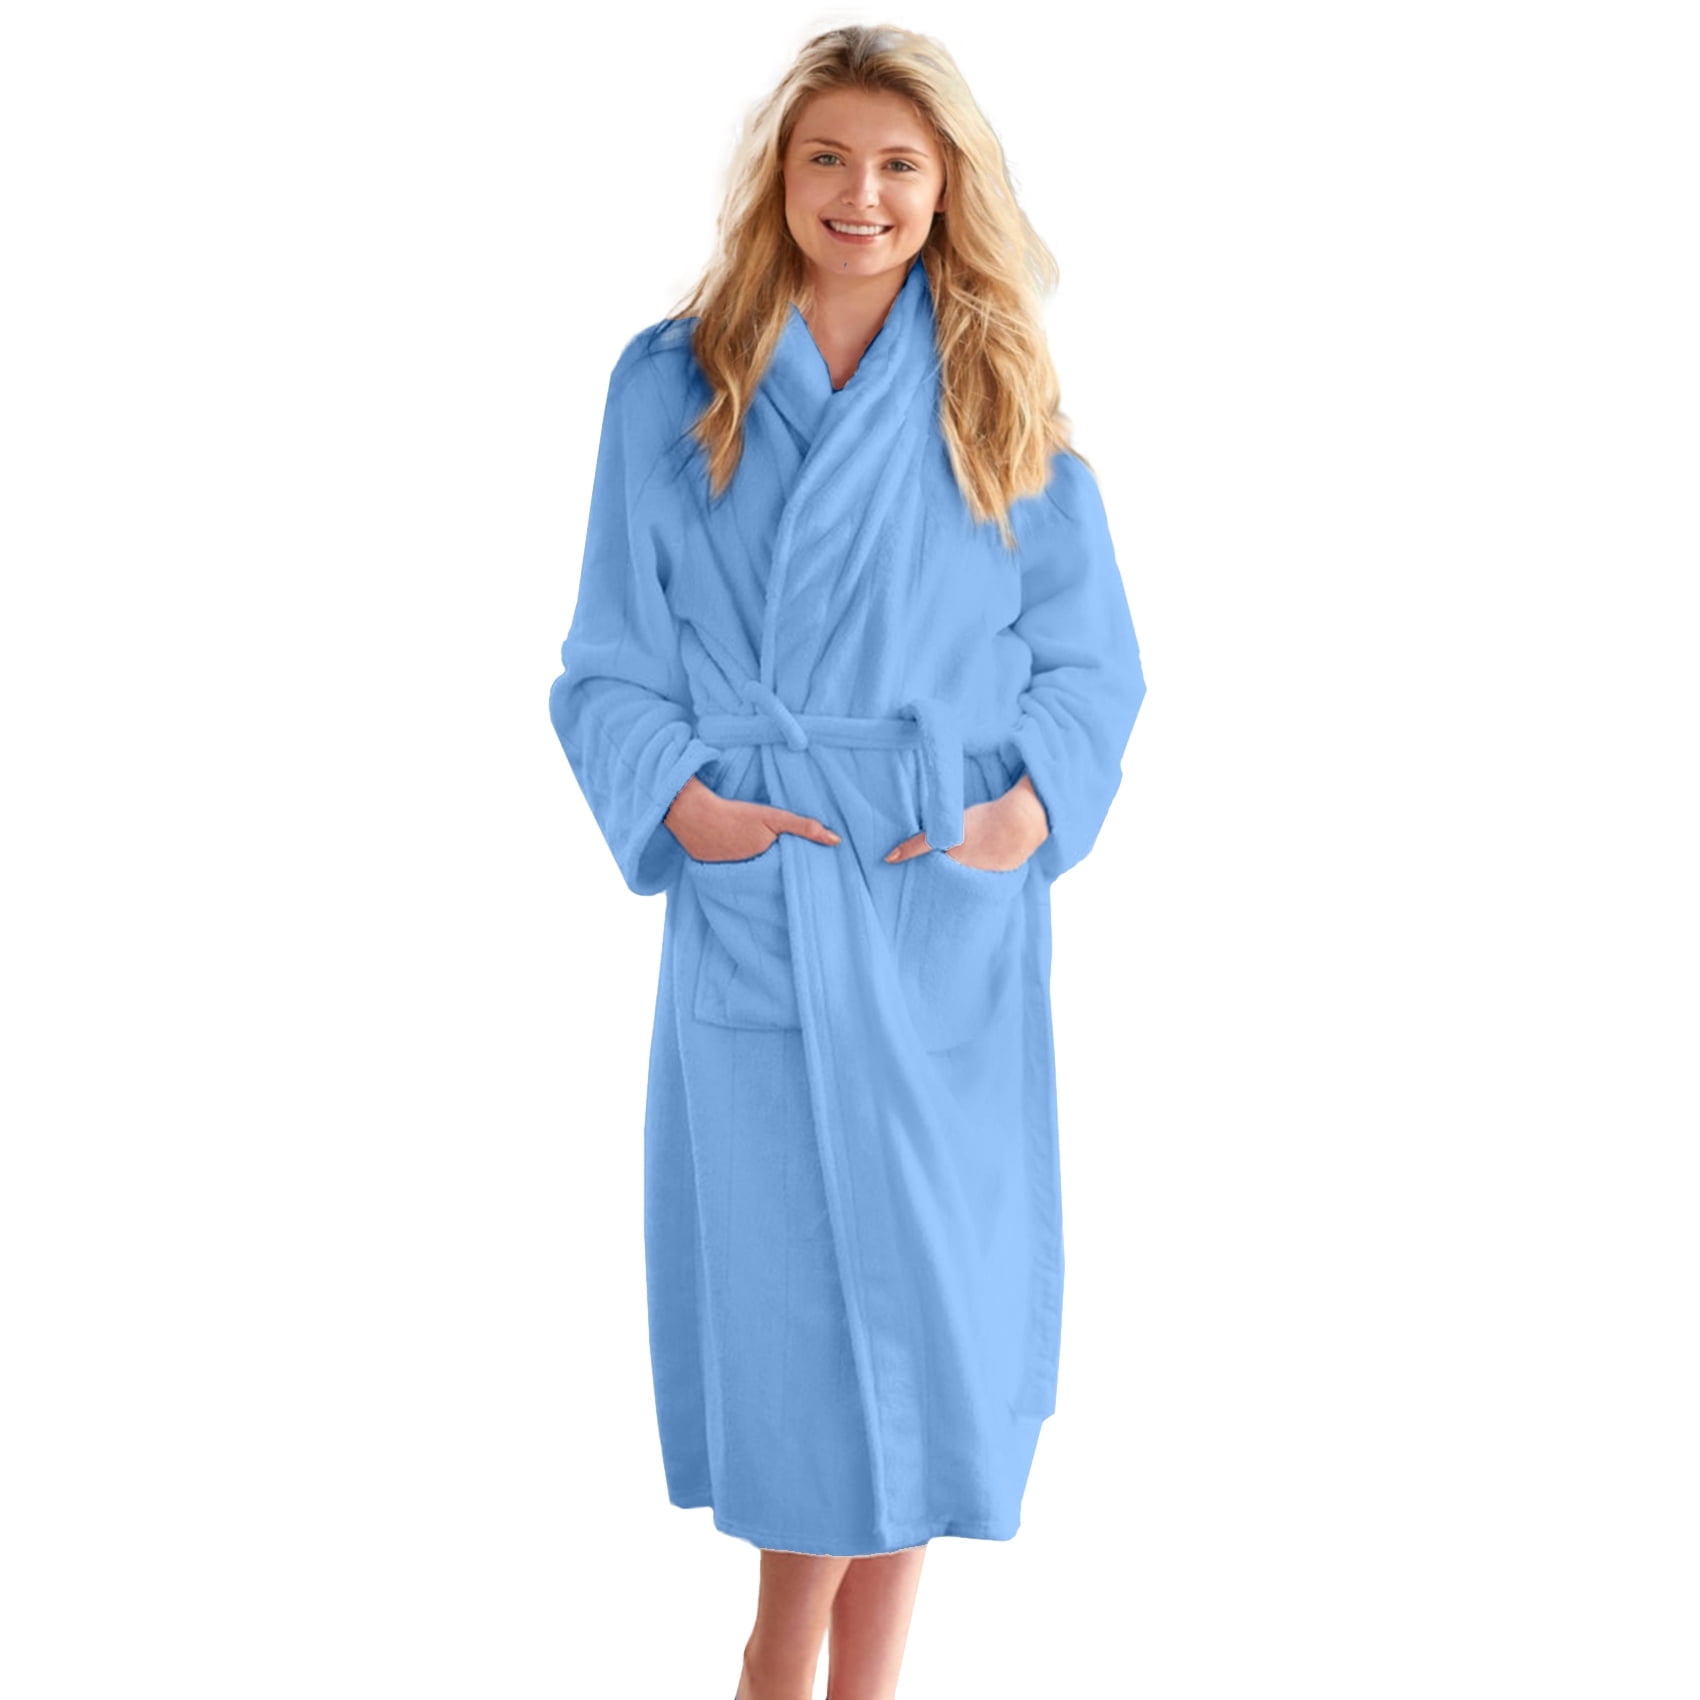 DAN RIVER Terry Cloth Robes for Women and Men - Lightweight 100% Cotton  Bathrobe - Unisex Plush Robe Perfect for Spa, Sauna, Shower or at Home  [Purple]